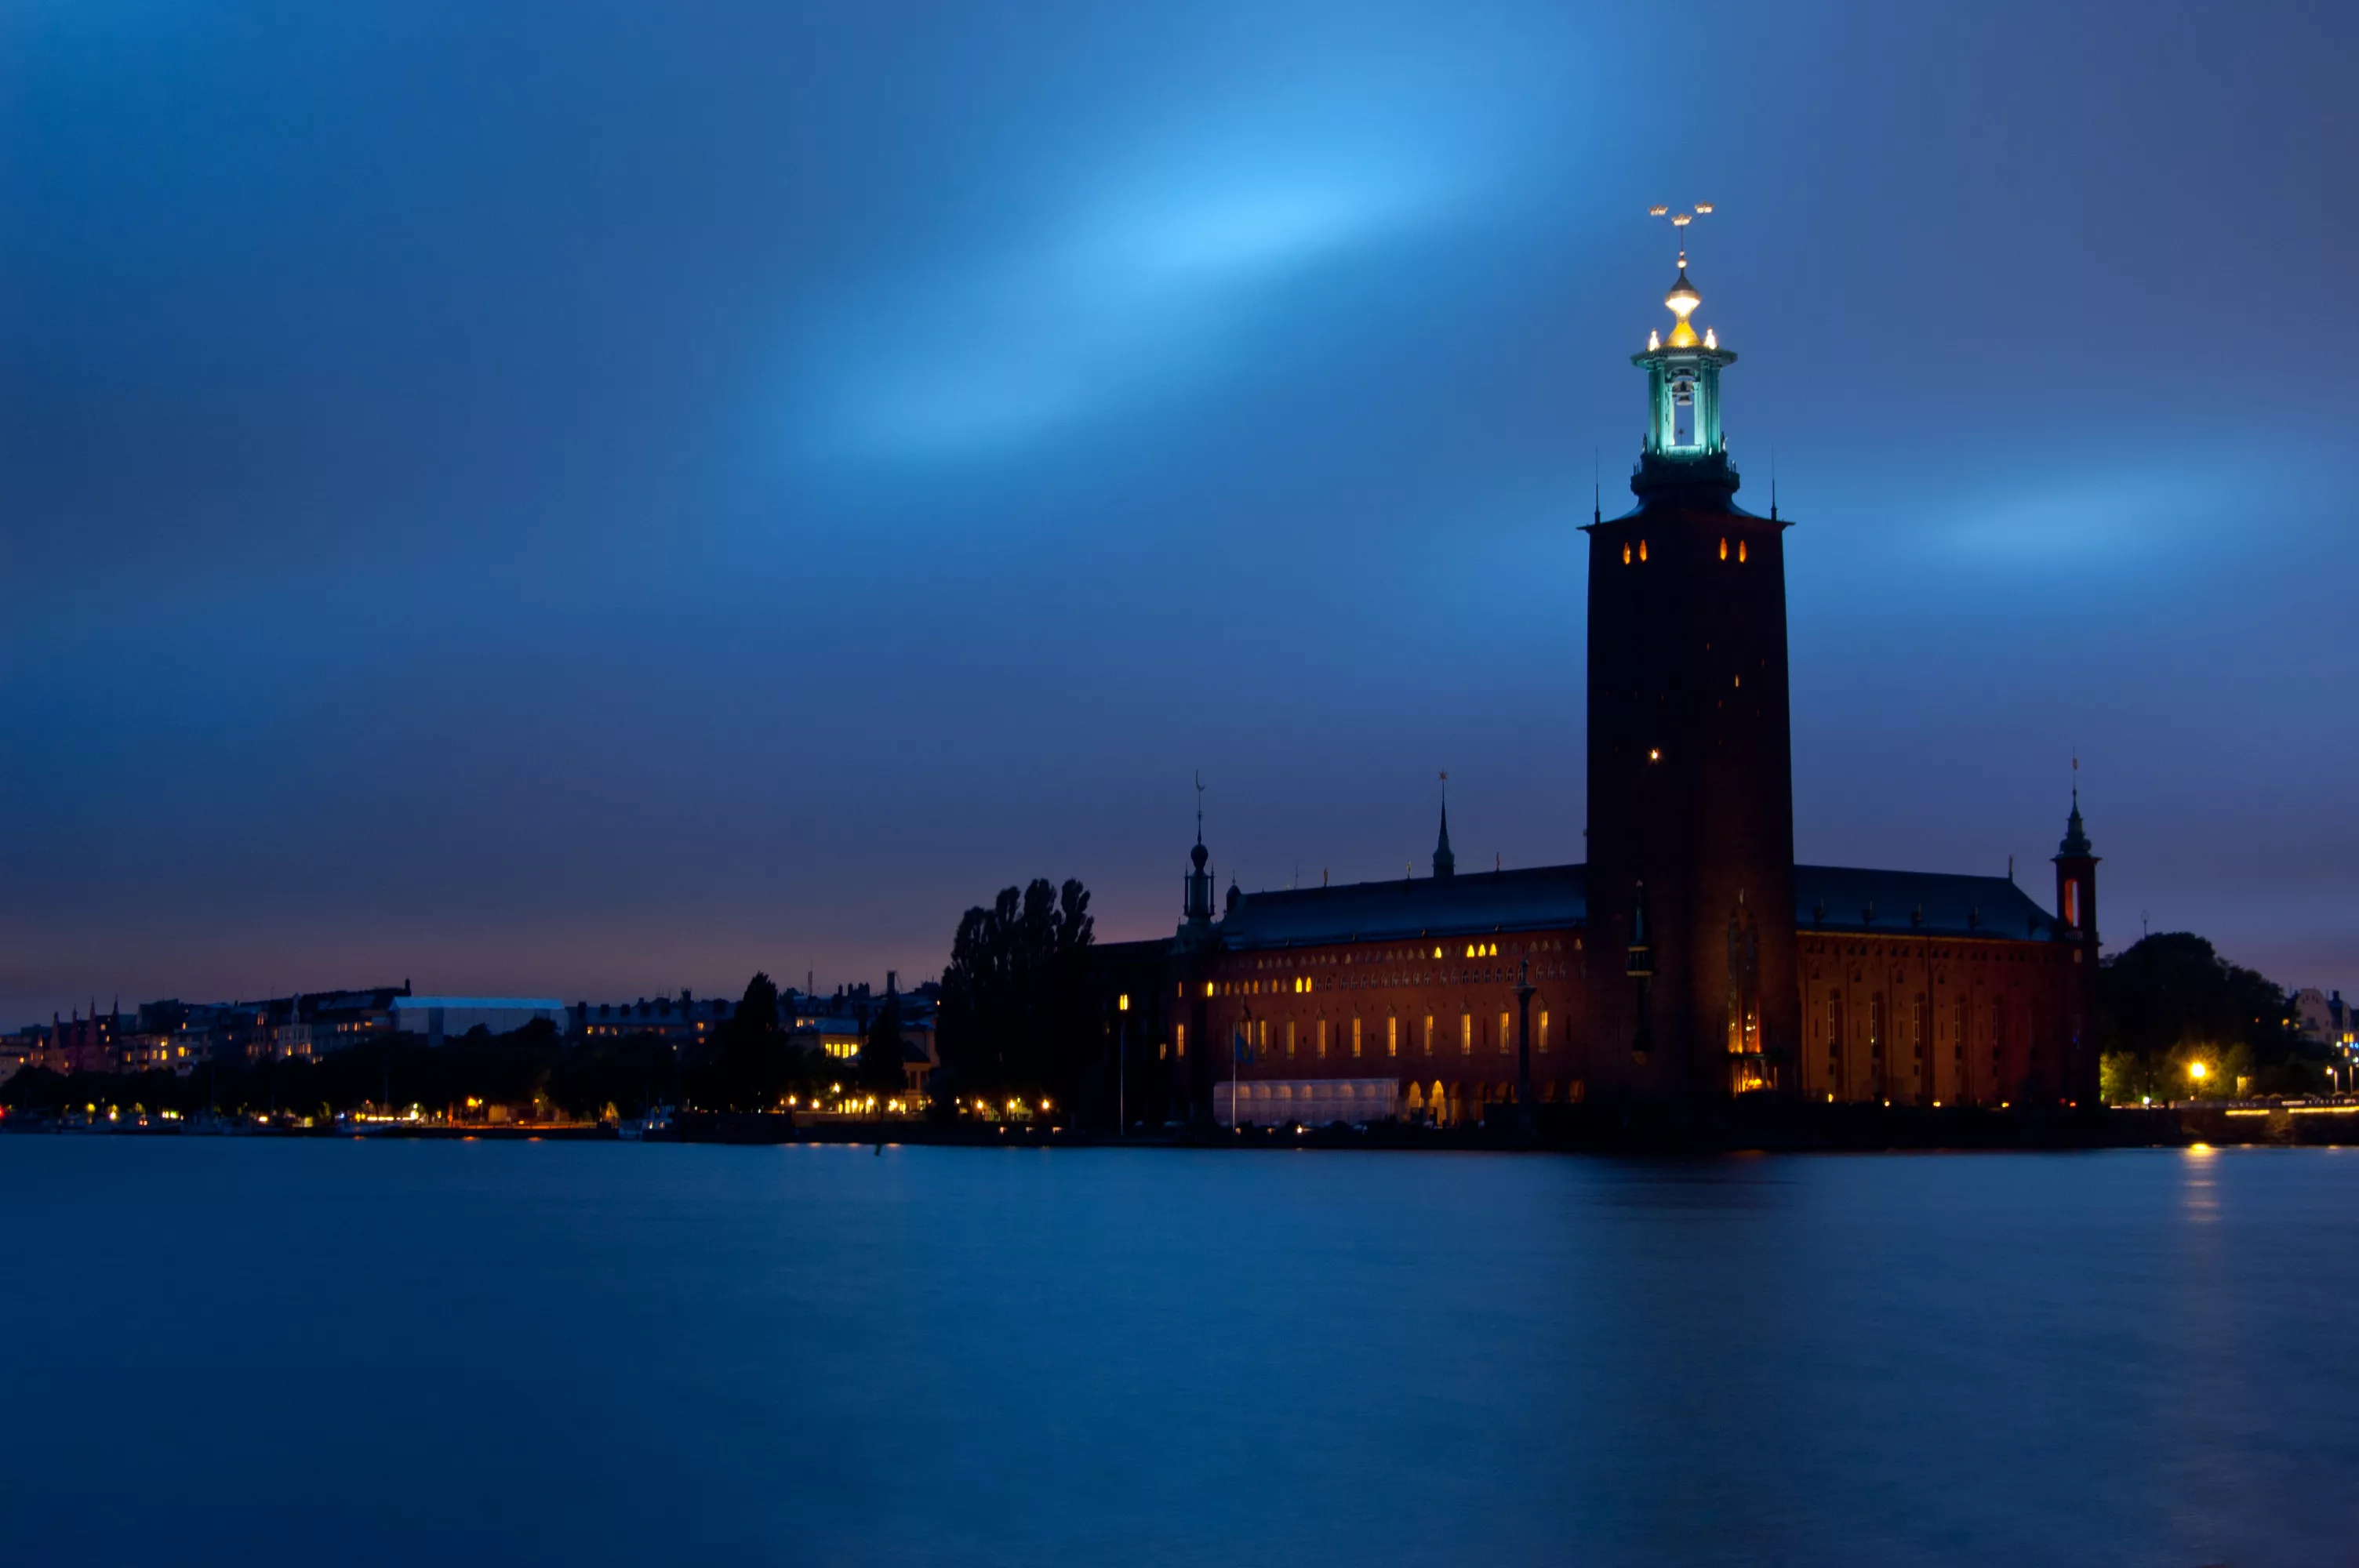 Stockholm City Hall in Sweden, Europe | Architecture - Rated 3.7